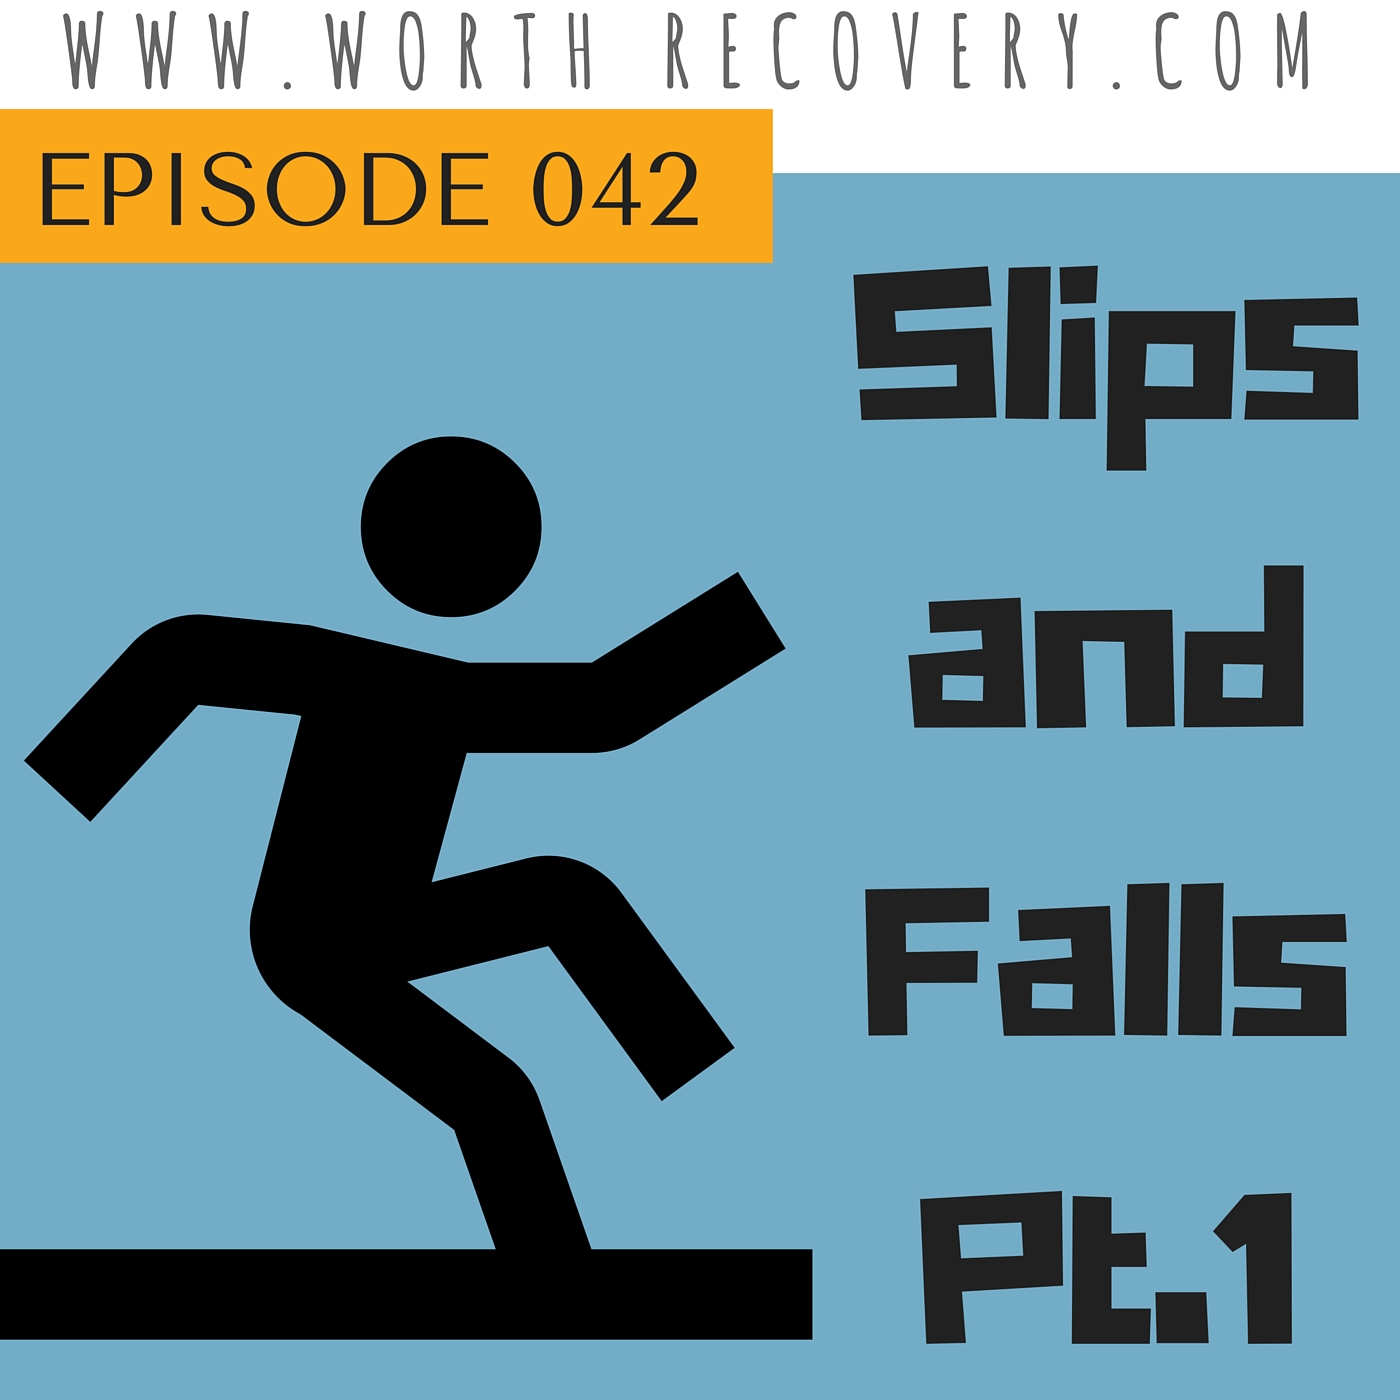 Episode 042: Slips and Falls, Part 1